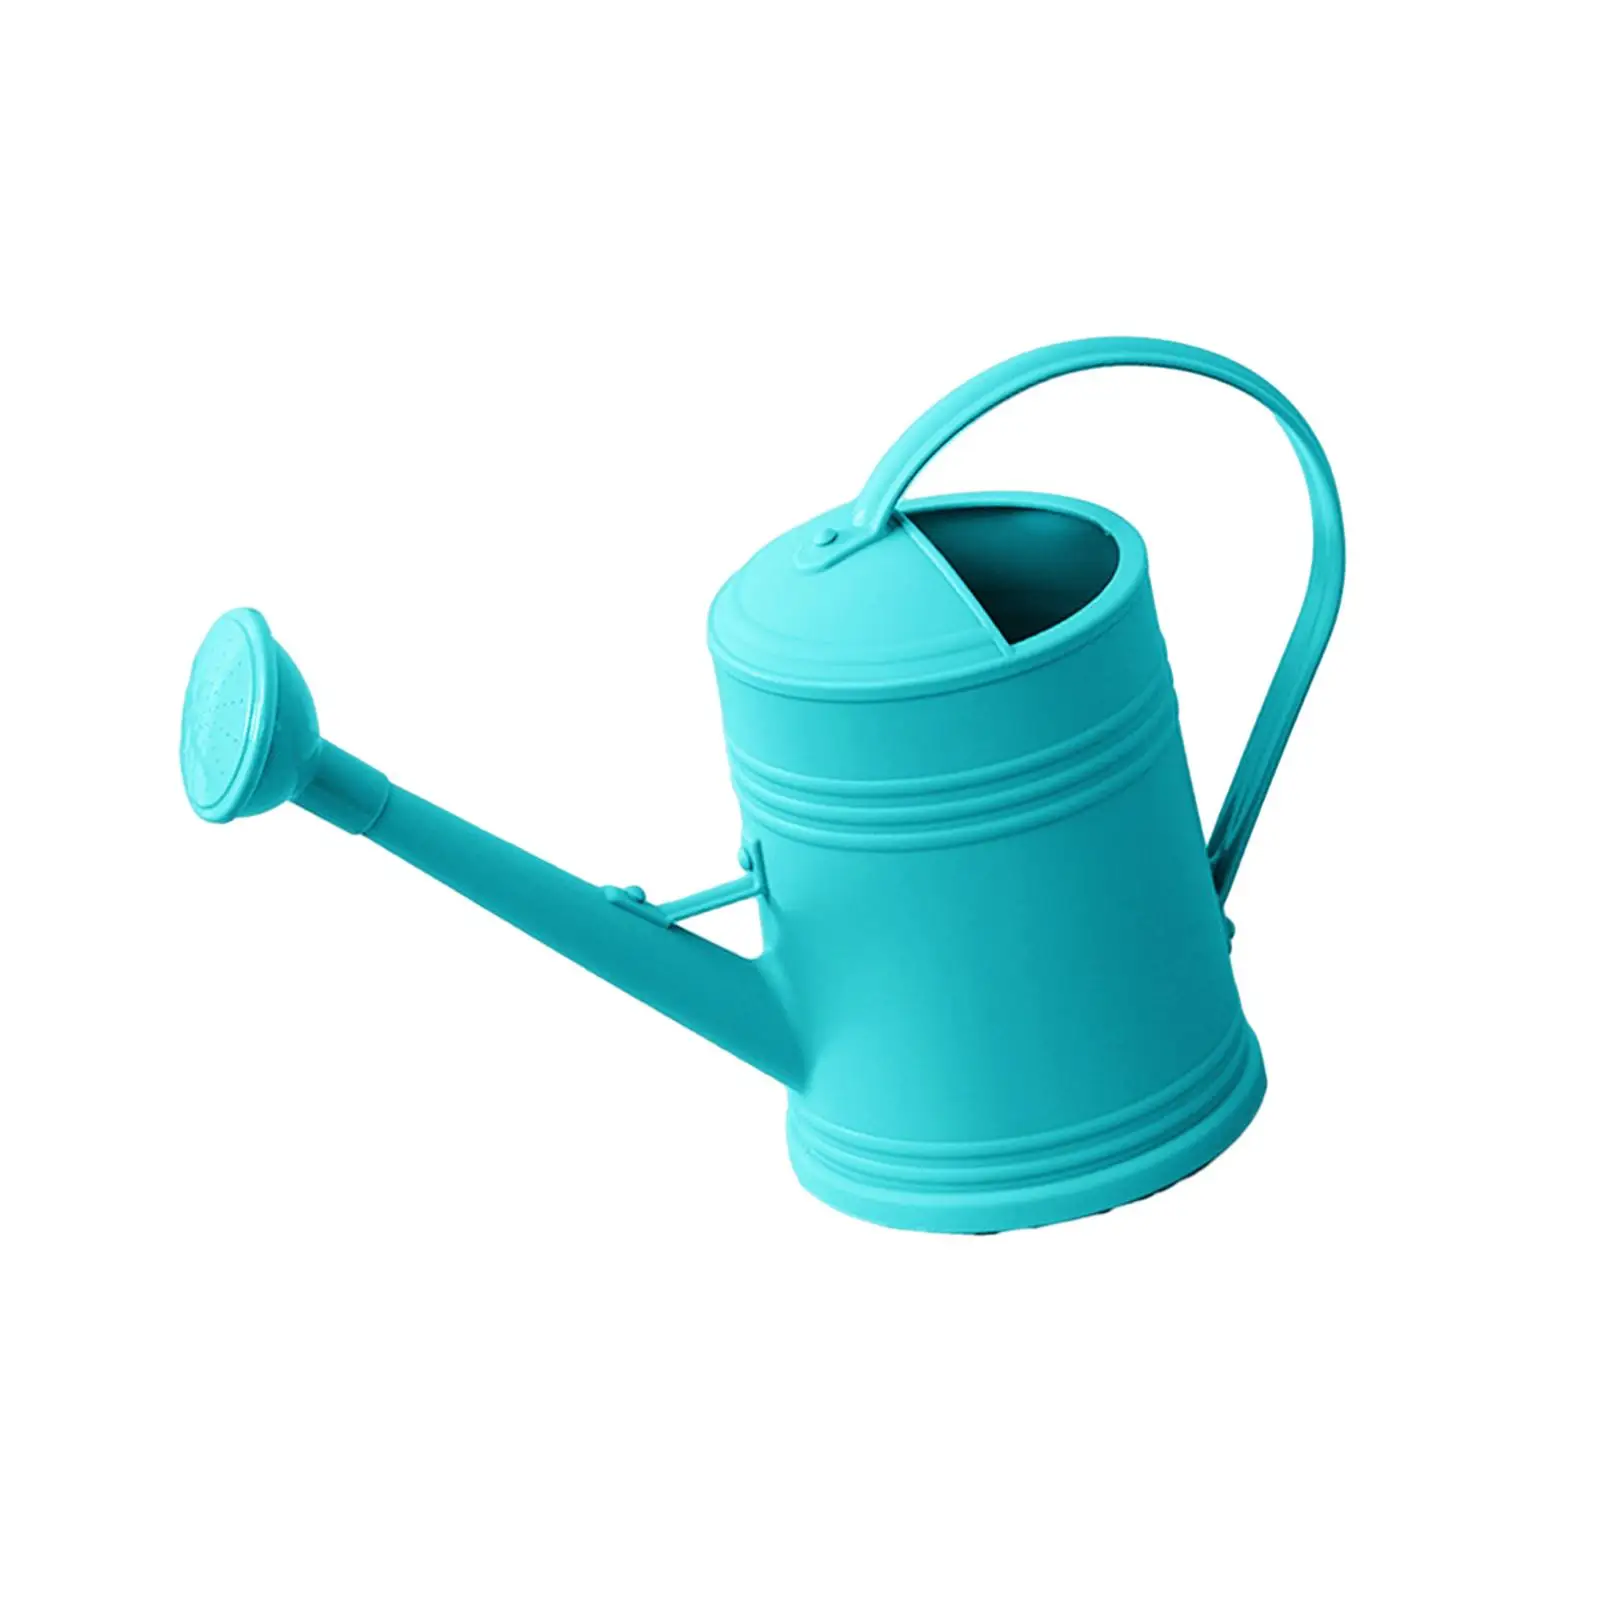 Long Spout Watering Can 0.5 Gallon Creative for Gardening Houseplants Flower